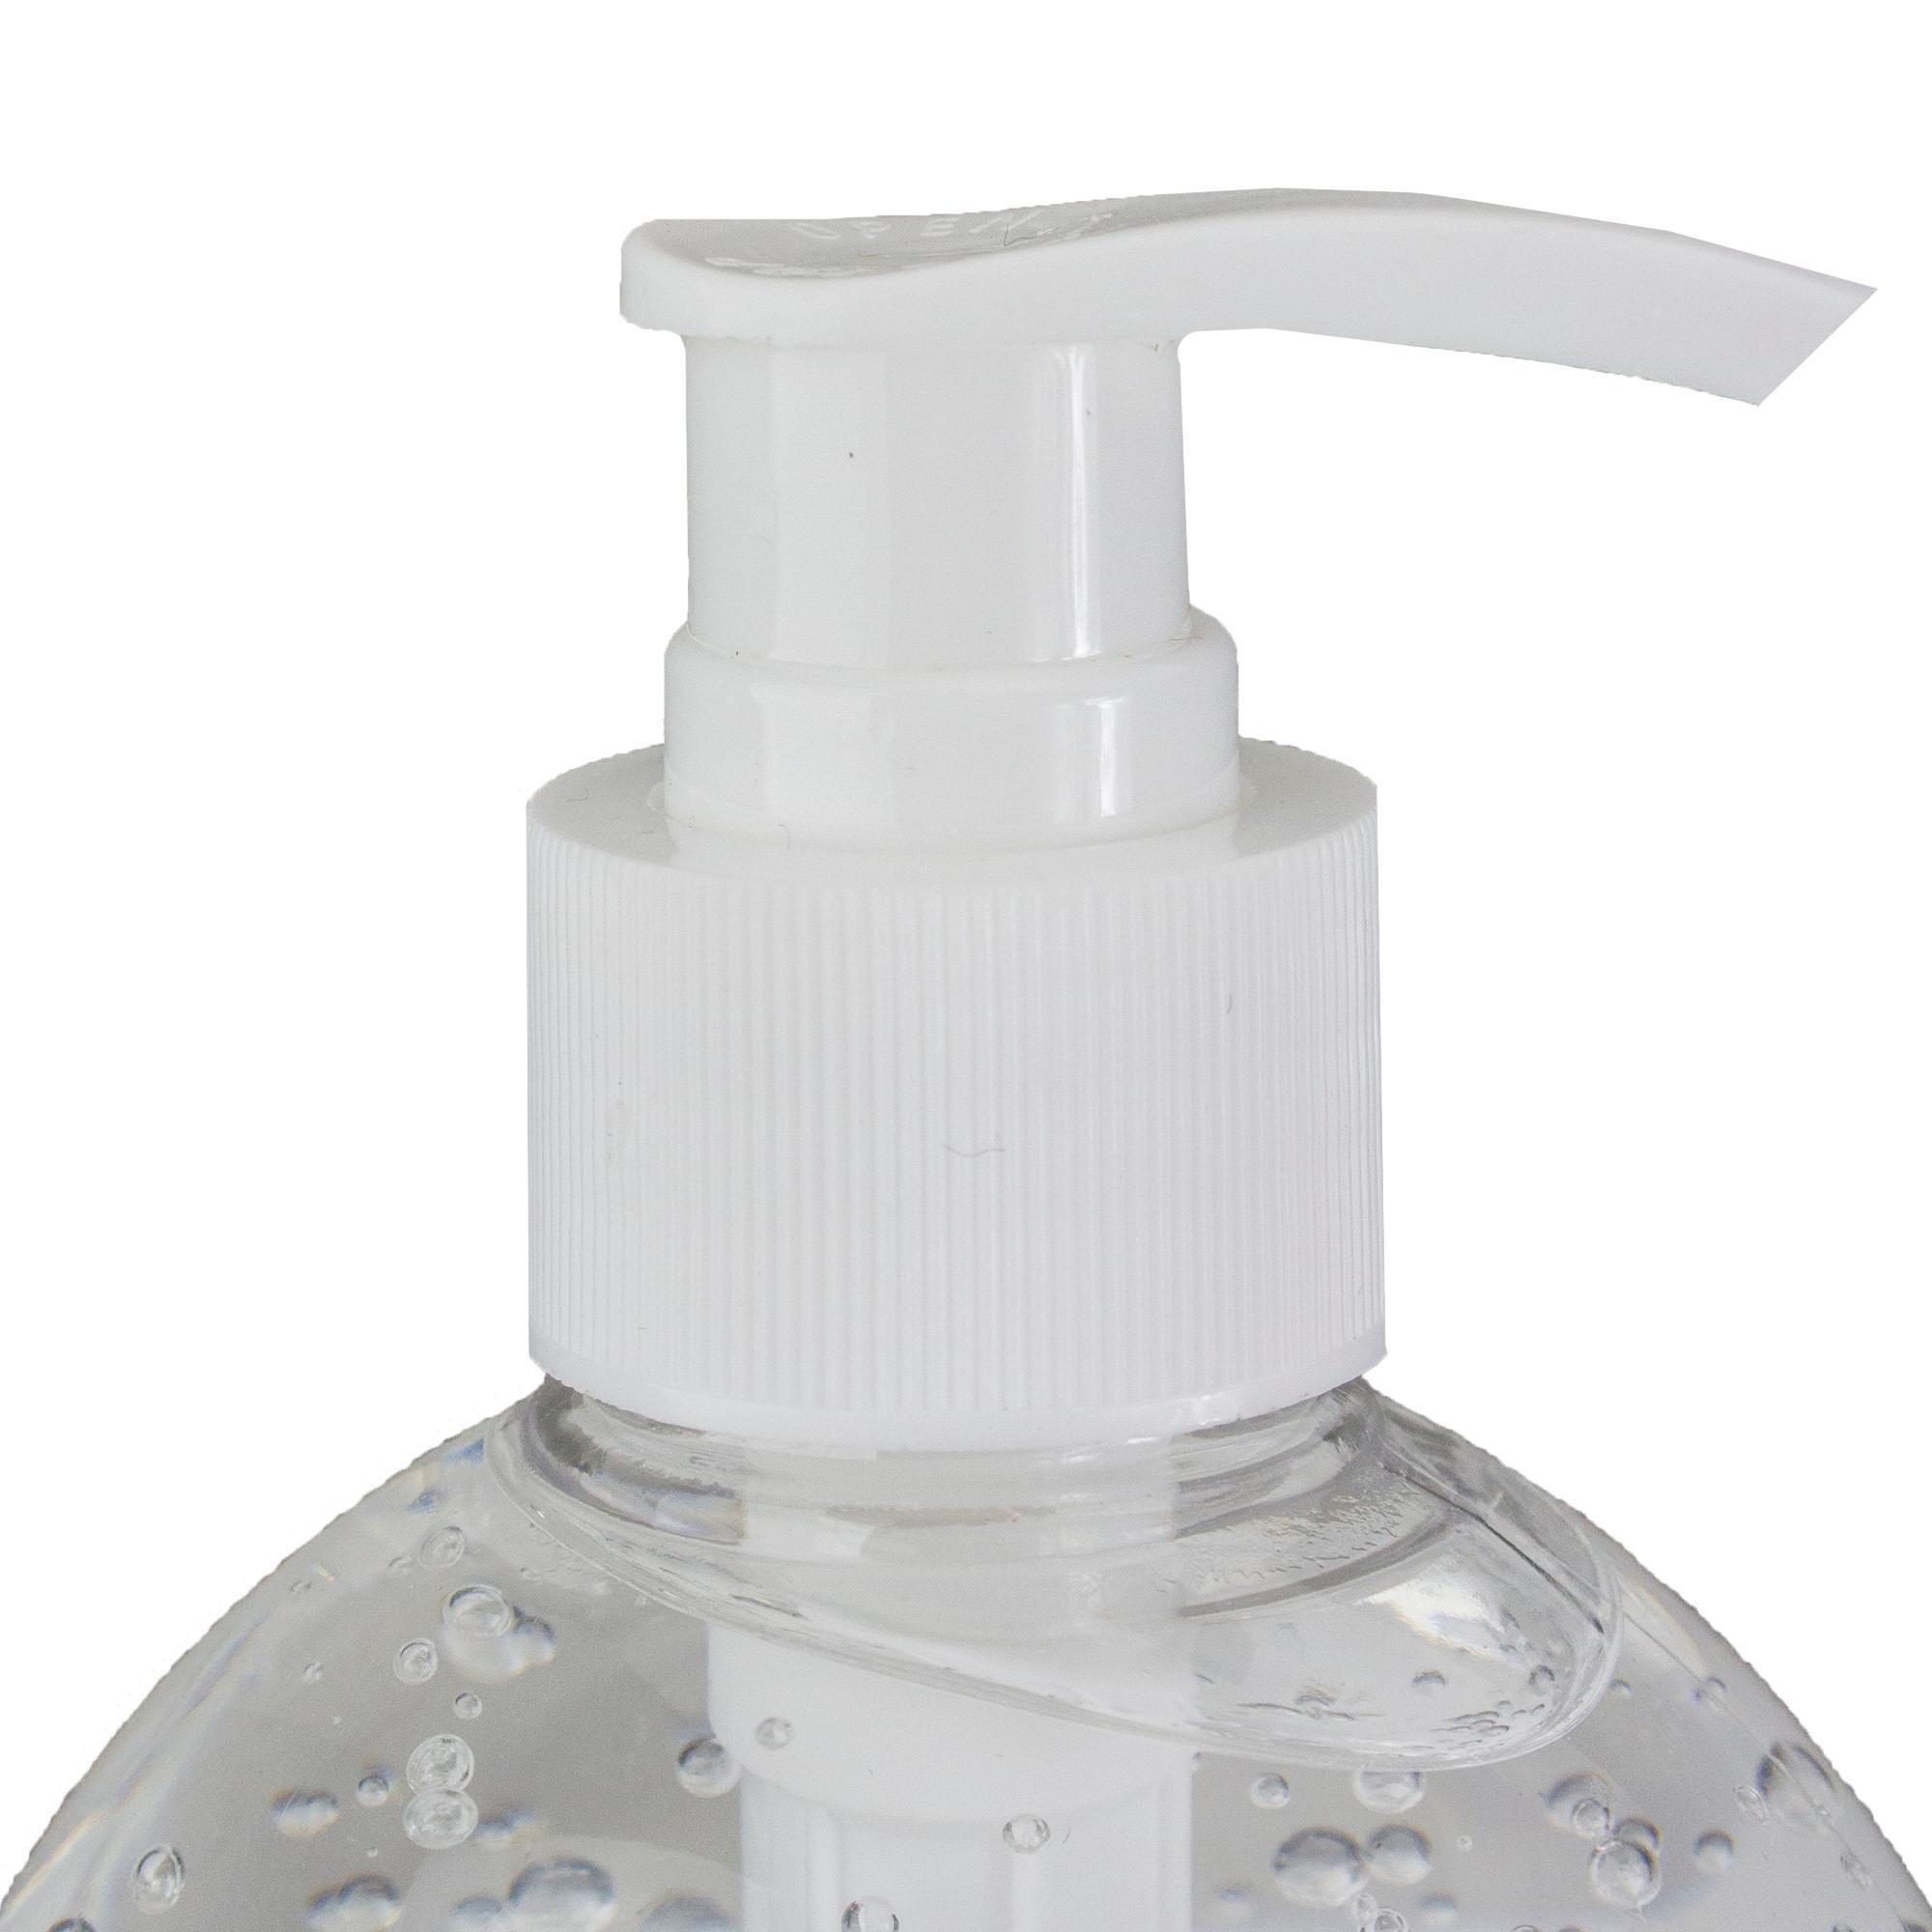 Case of 12 474ml 75% Alcohol Anti-Bacterial Gel Hand Sanitizer with Pump alternate image